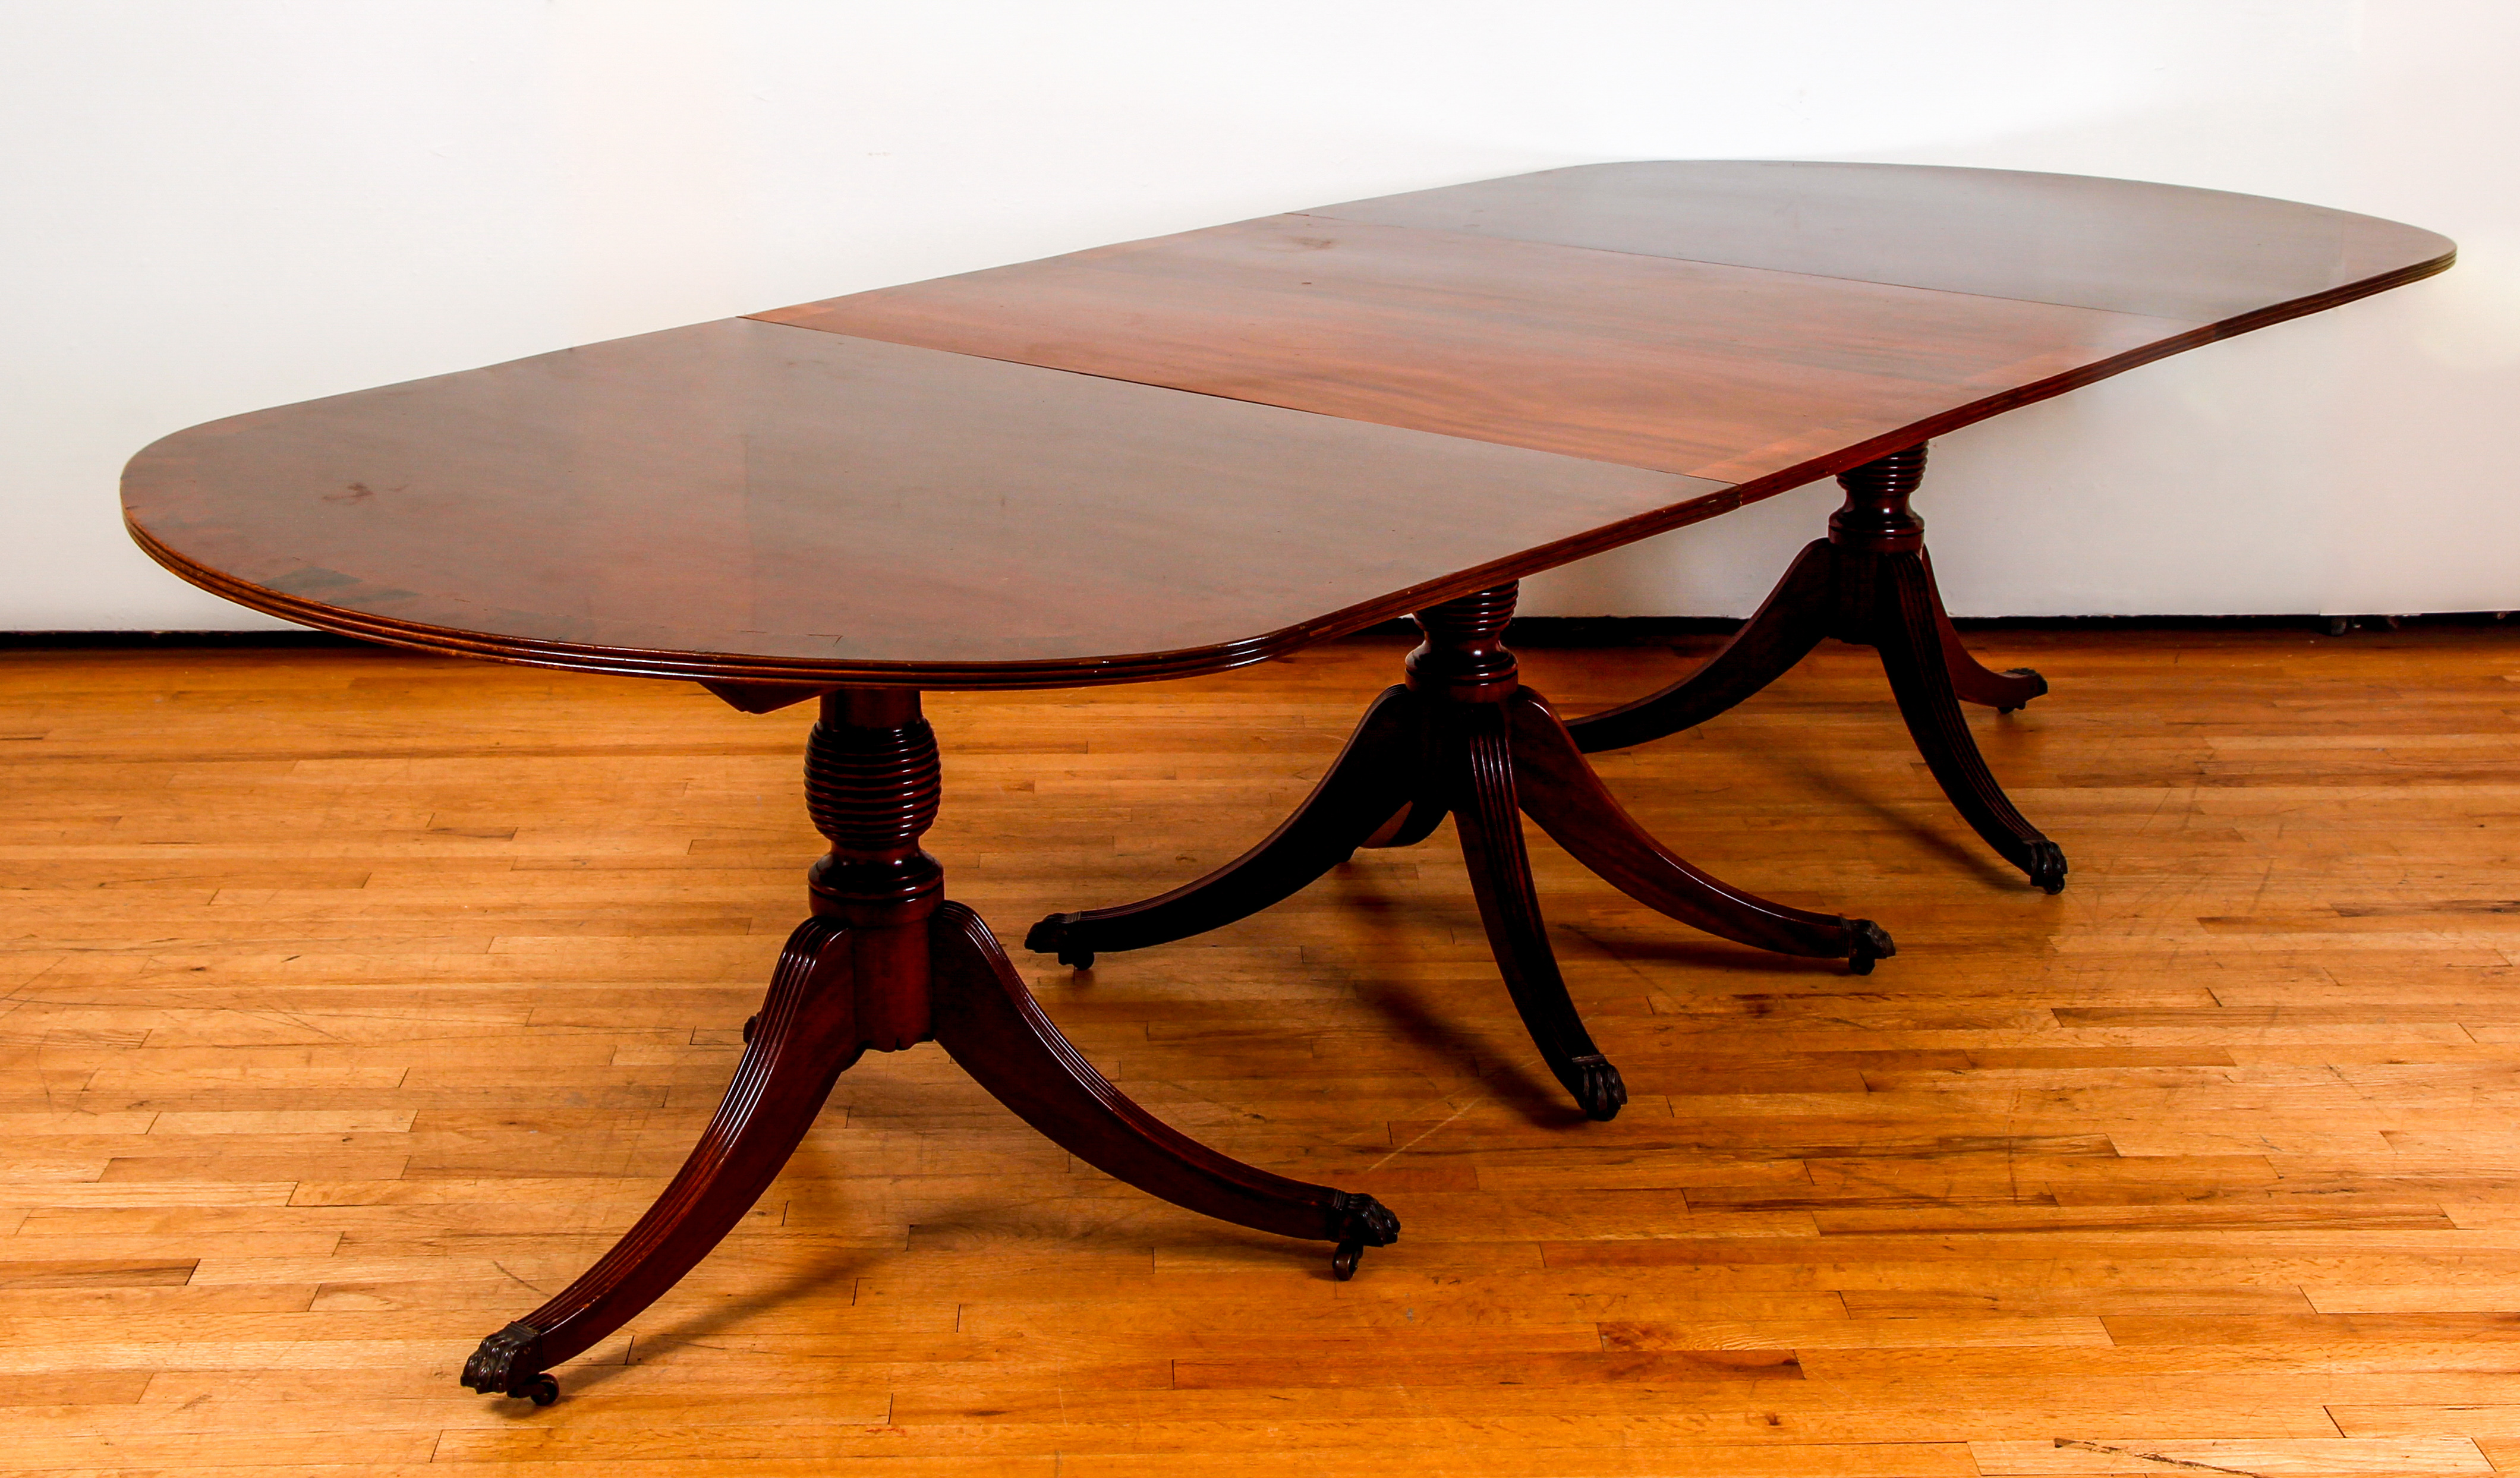 Duncan Phyfe Style triple pedestal dining table